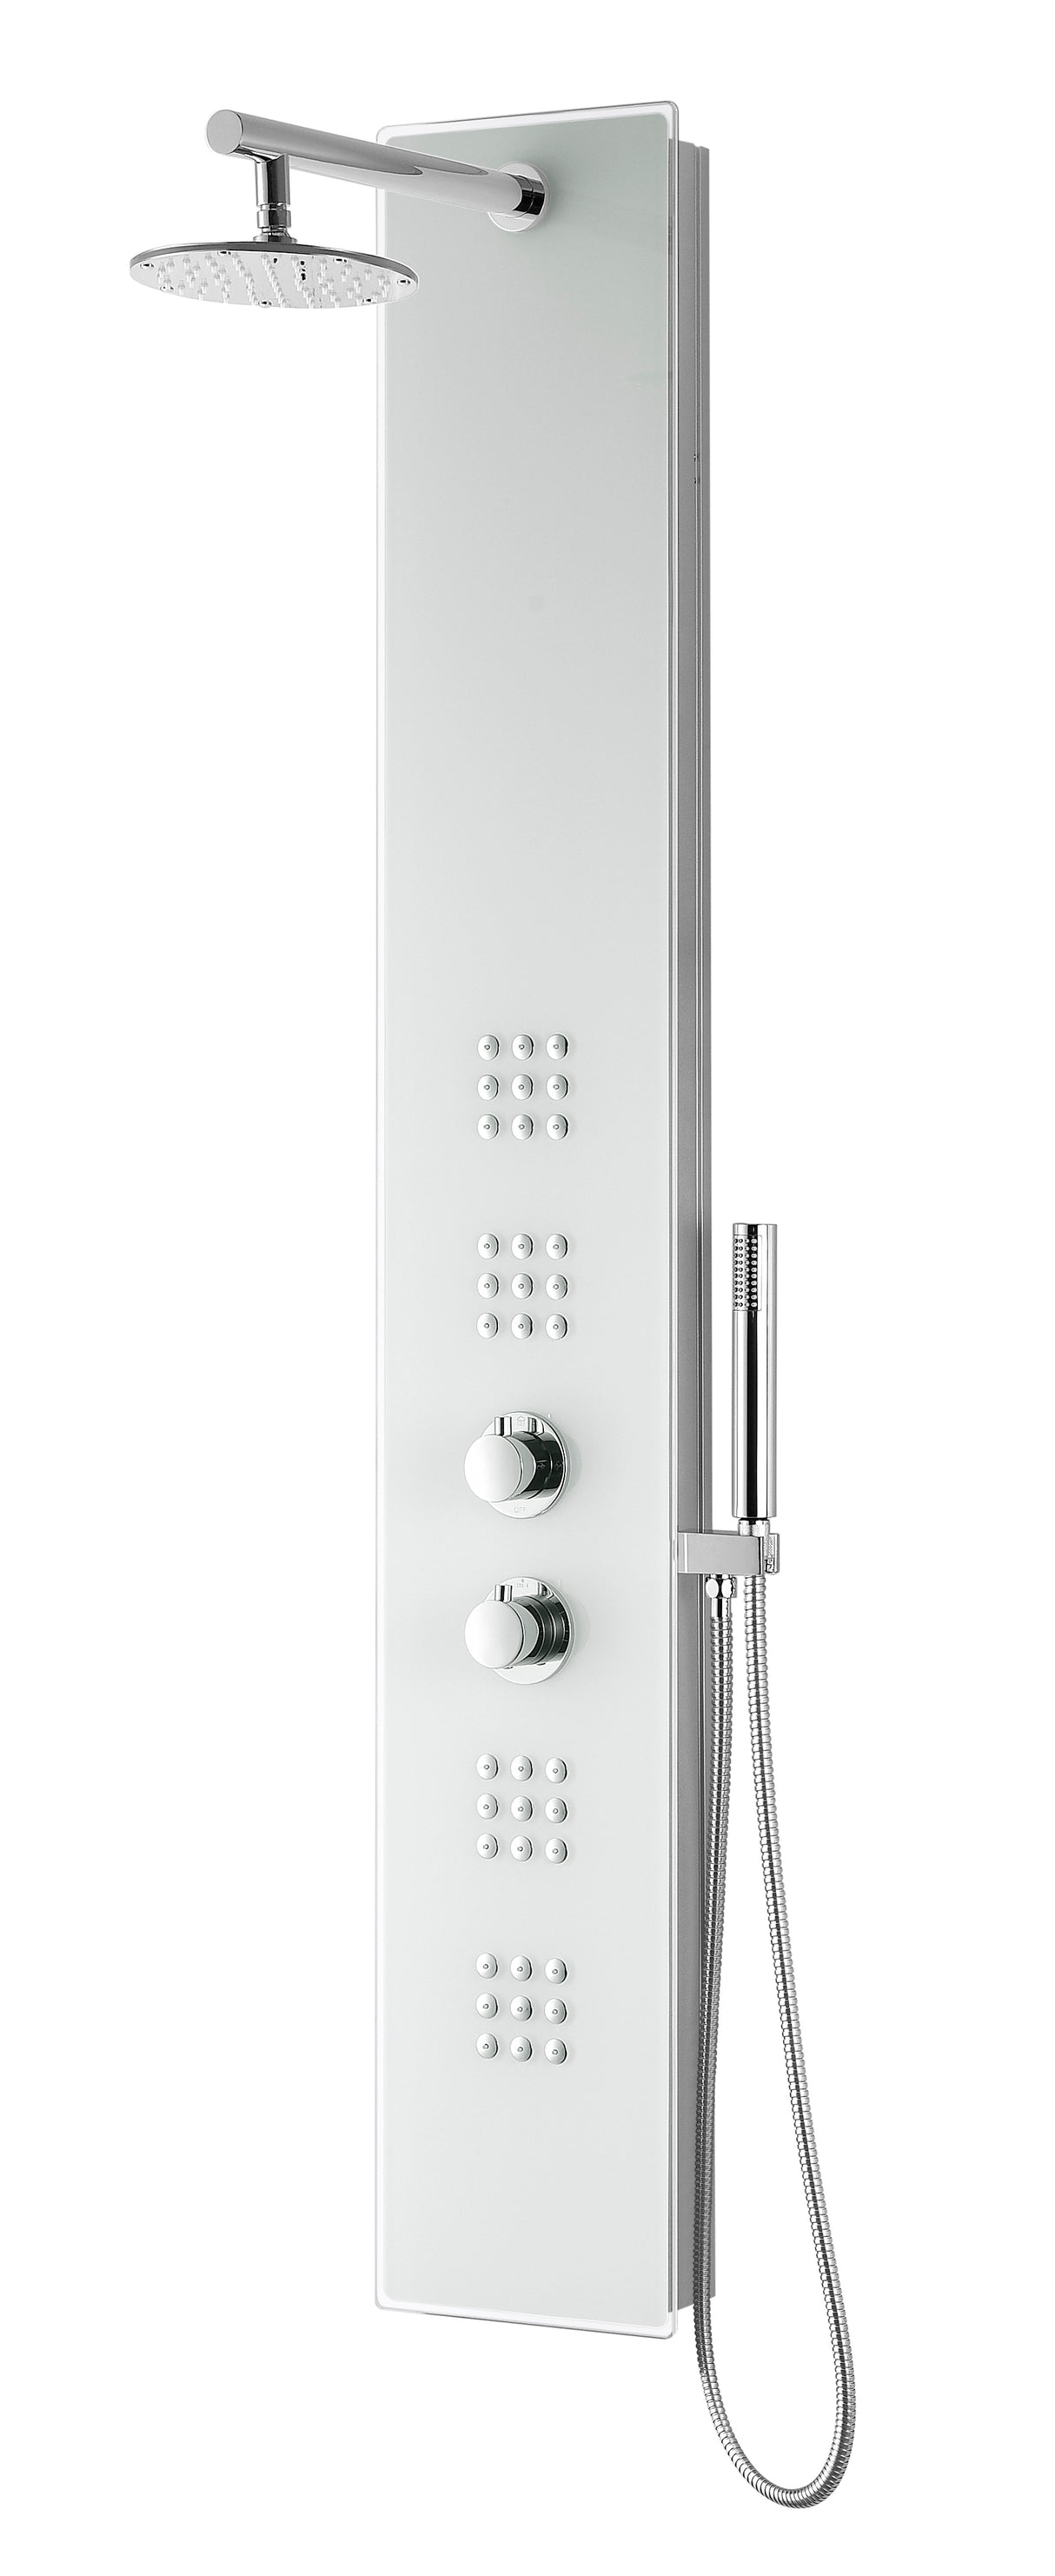 ANZZI SP-AZ048 Veld Series 64 in. Full Body Shower Panel System with Heavy Rain Shower and Spray Wand in White